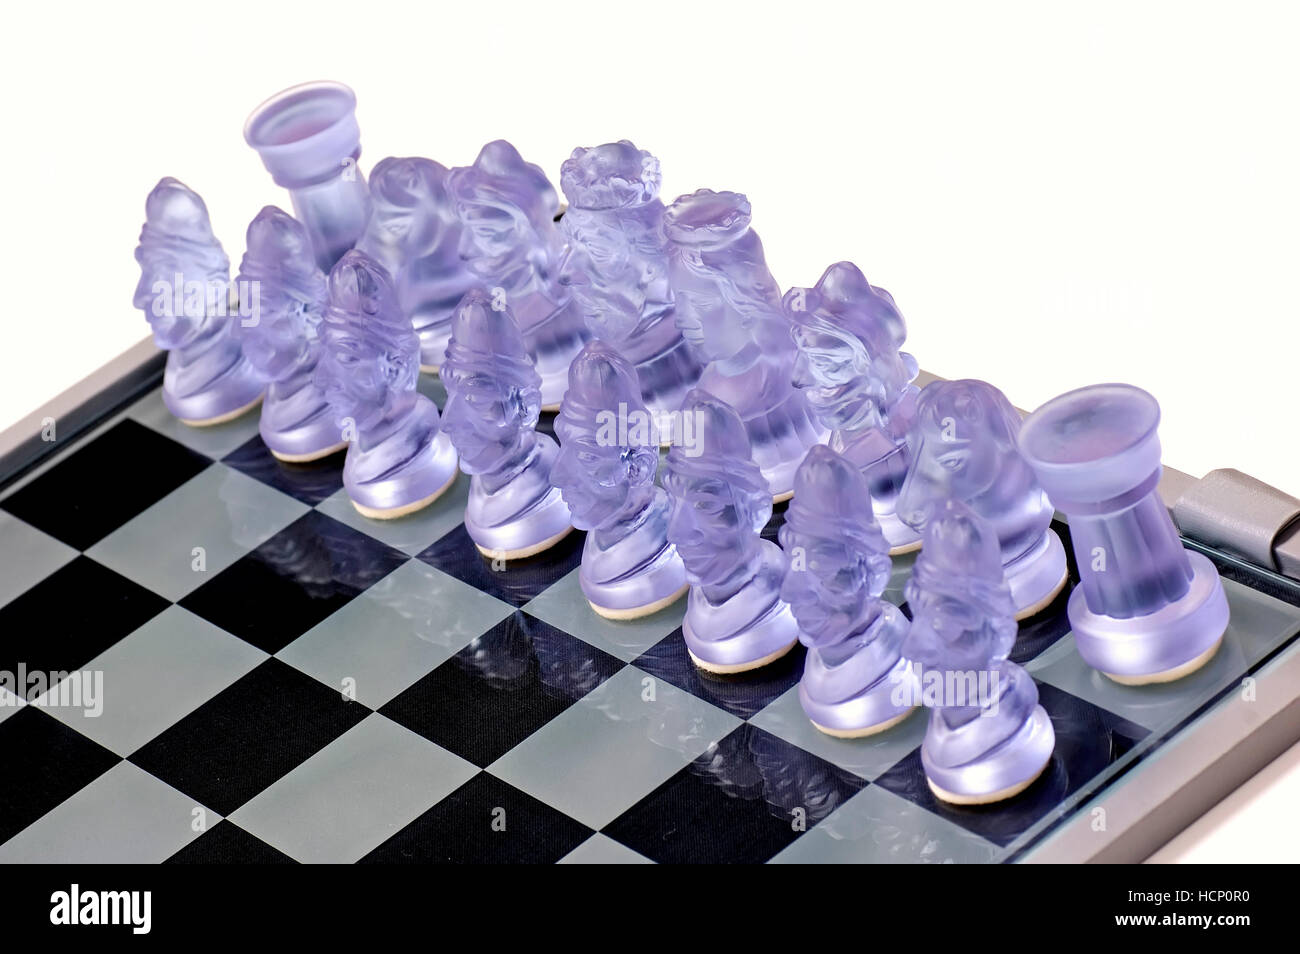 Ready to play white pieces of chessmen made from crystal glass. Stock Photo